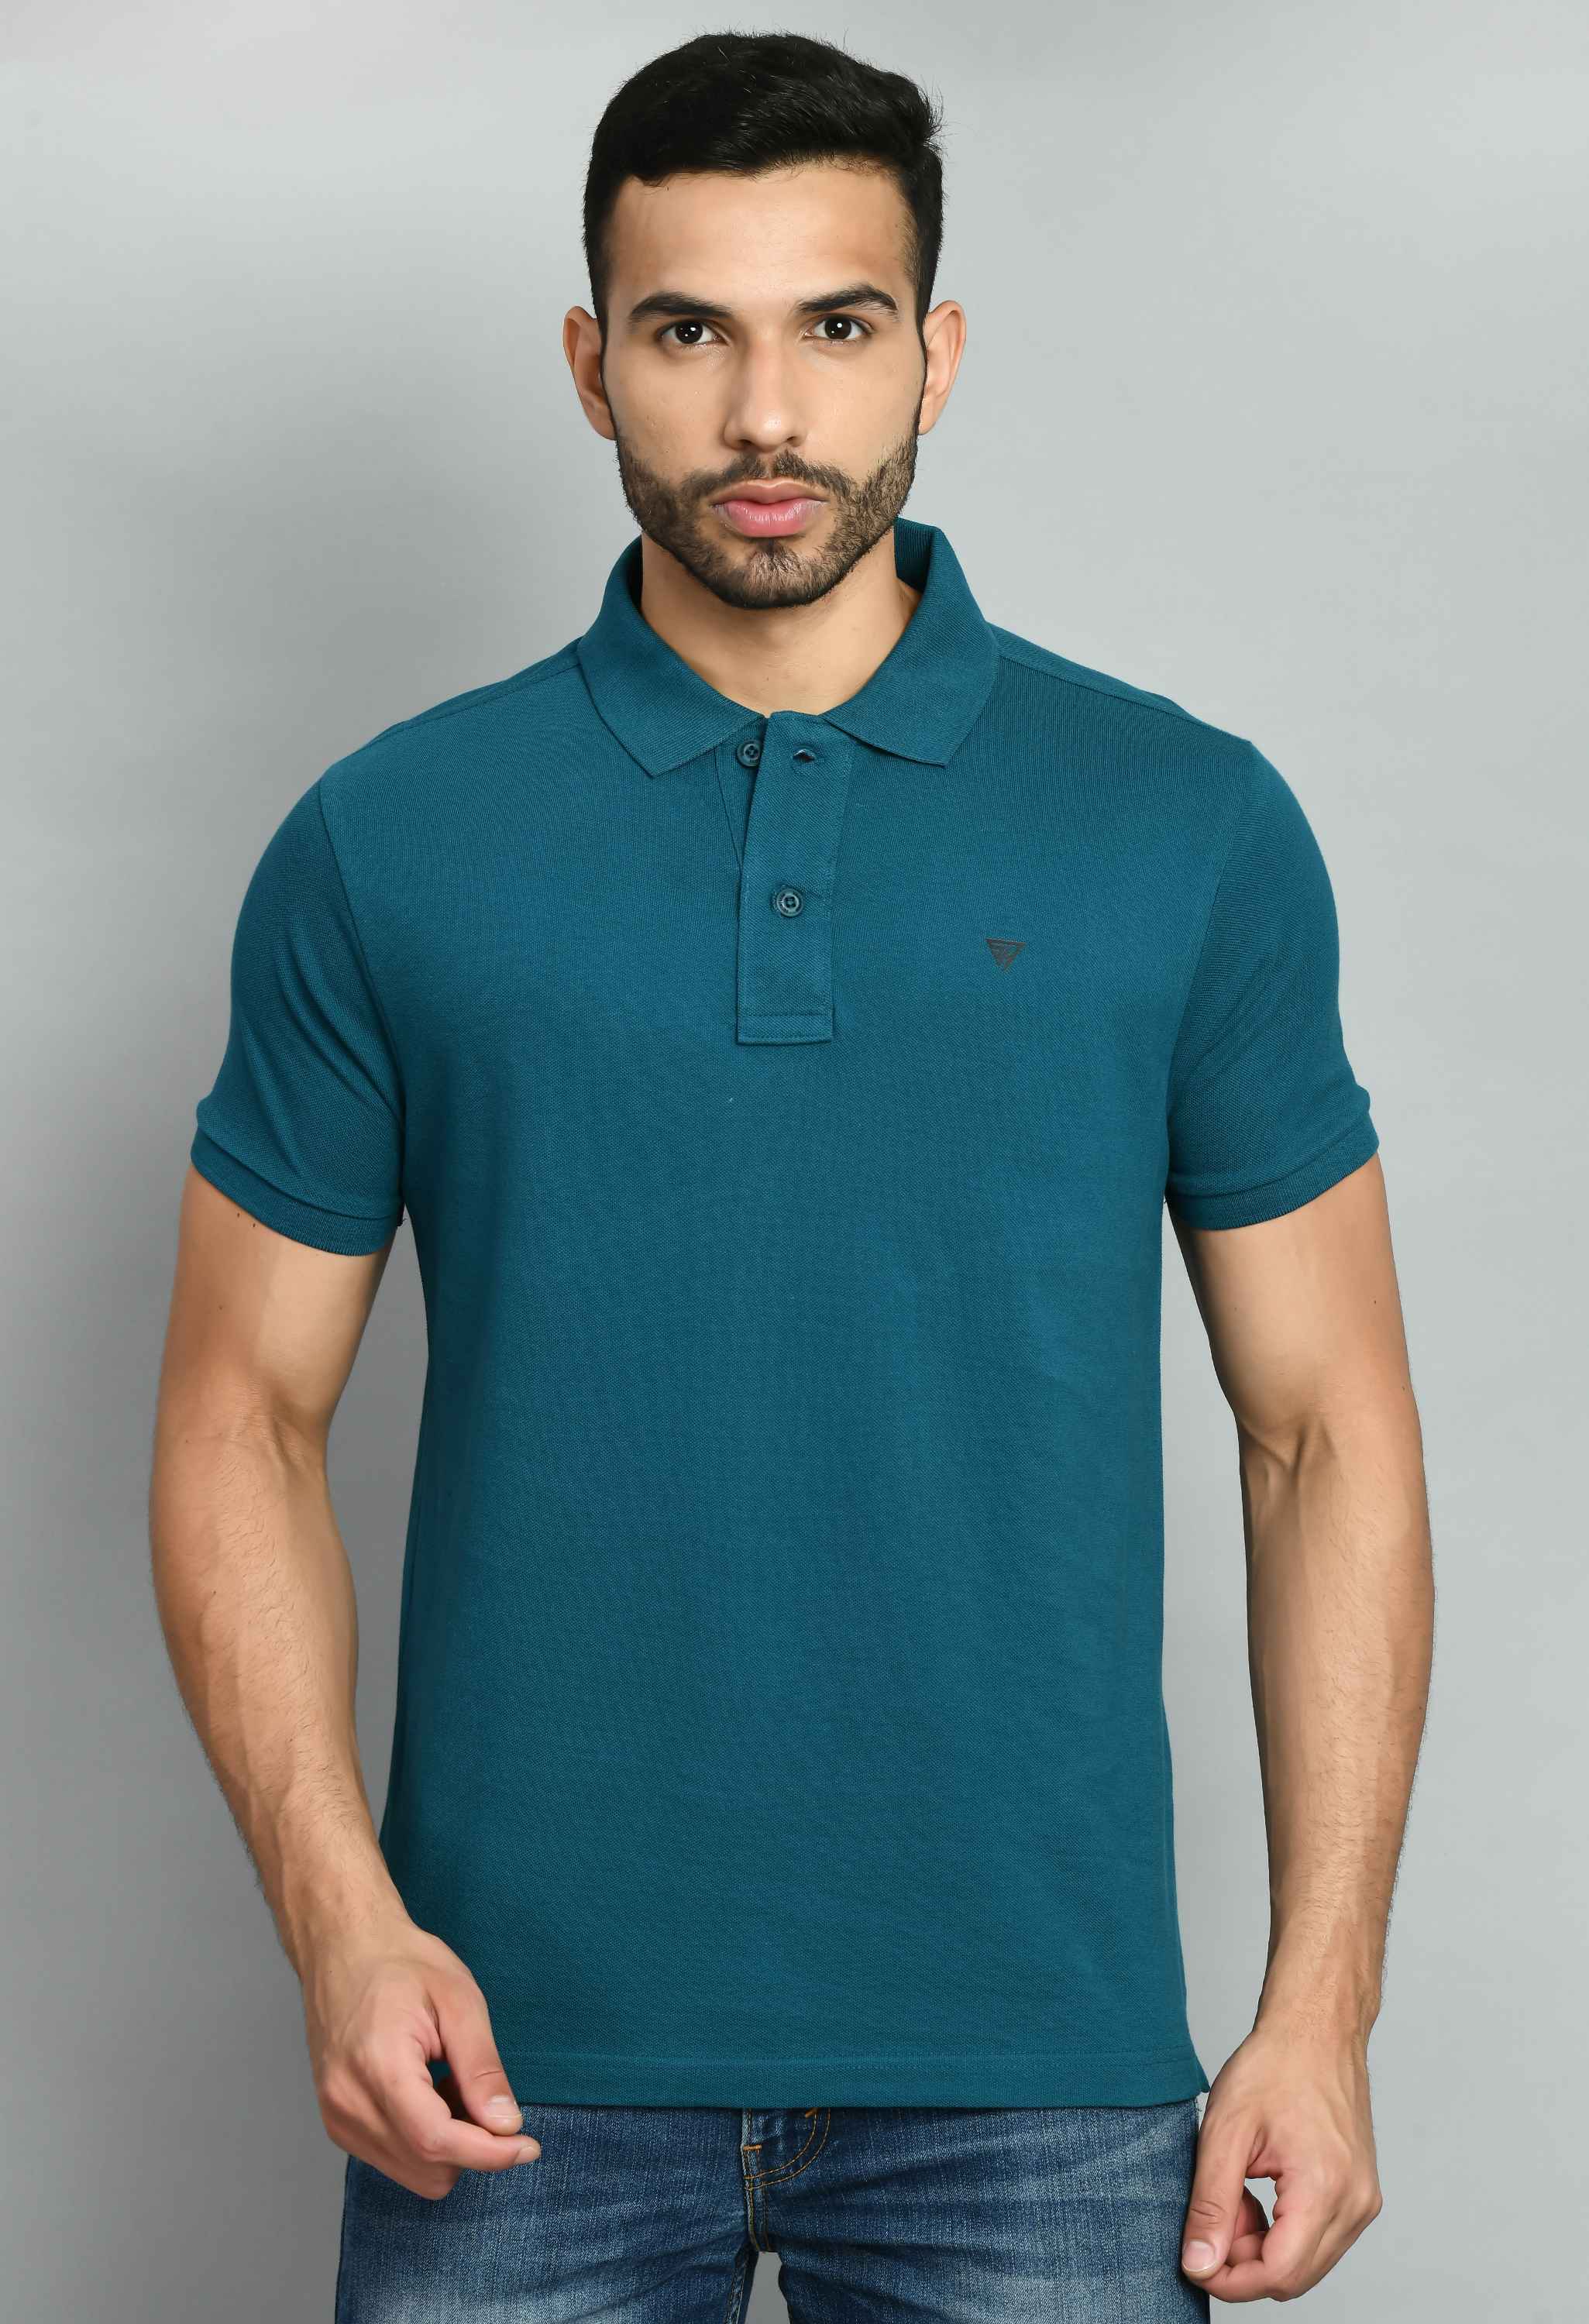 Men's Solid Tint Blue Polo Collar T-Shirt